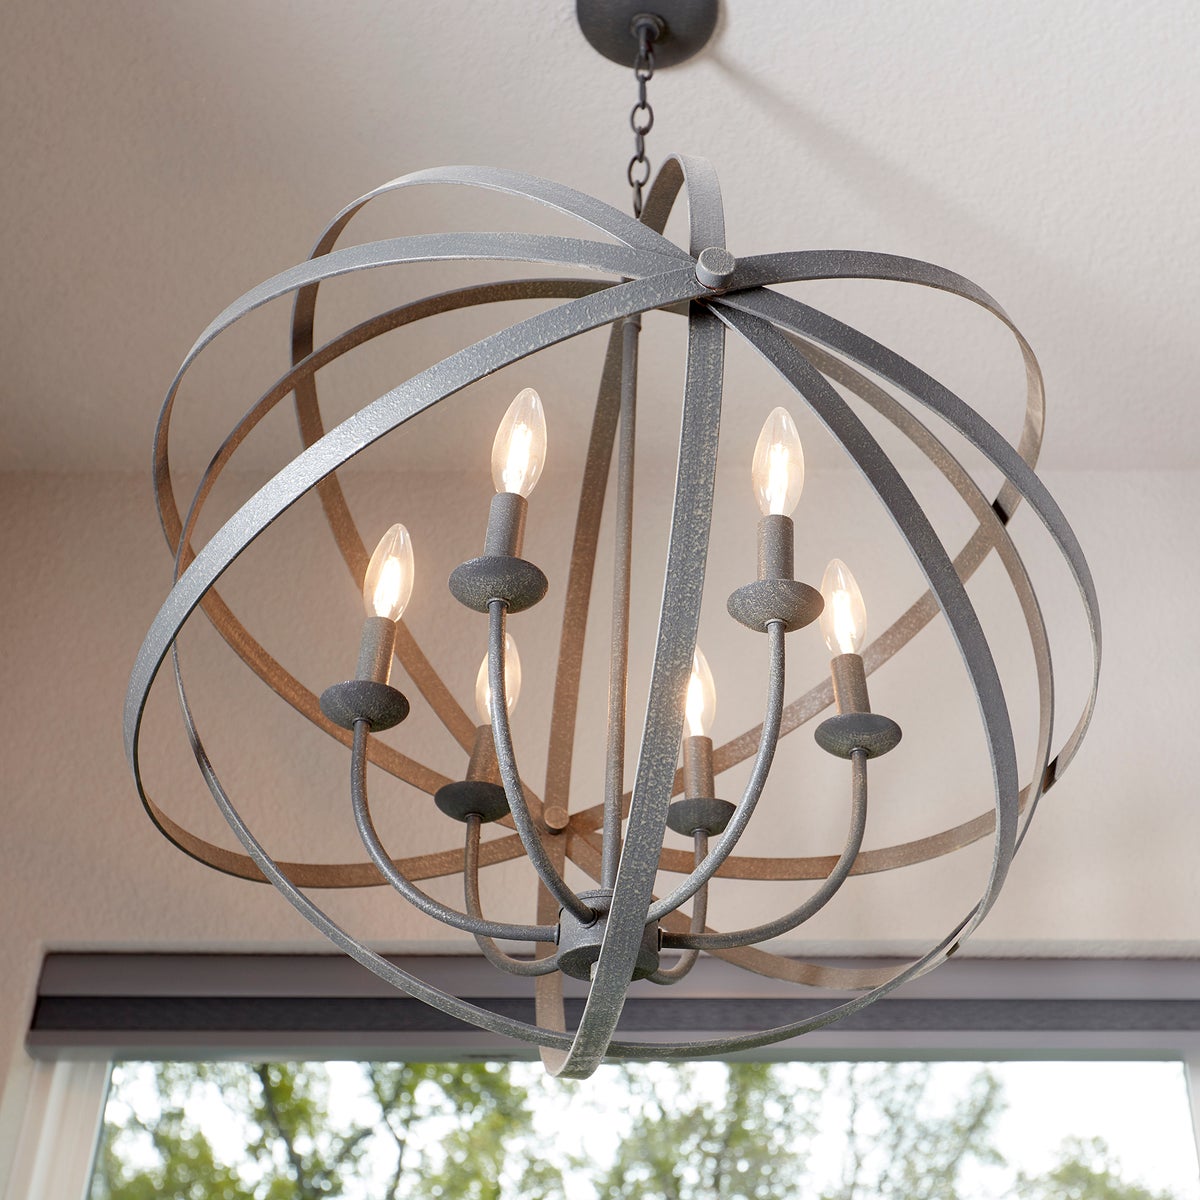 A modern sphere chandelier with strategically placed metal rings and candelabra lights, perfect for brightening up any atmosphere.